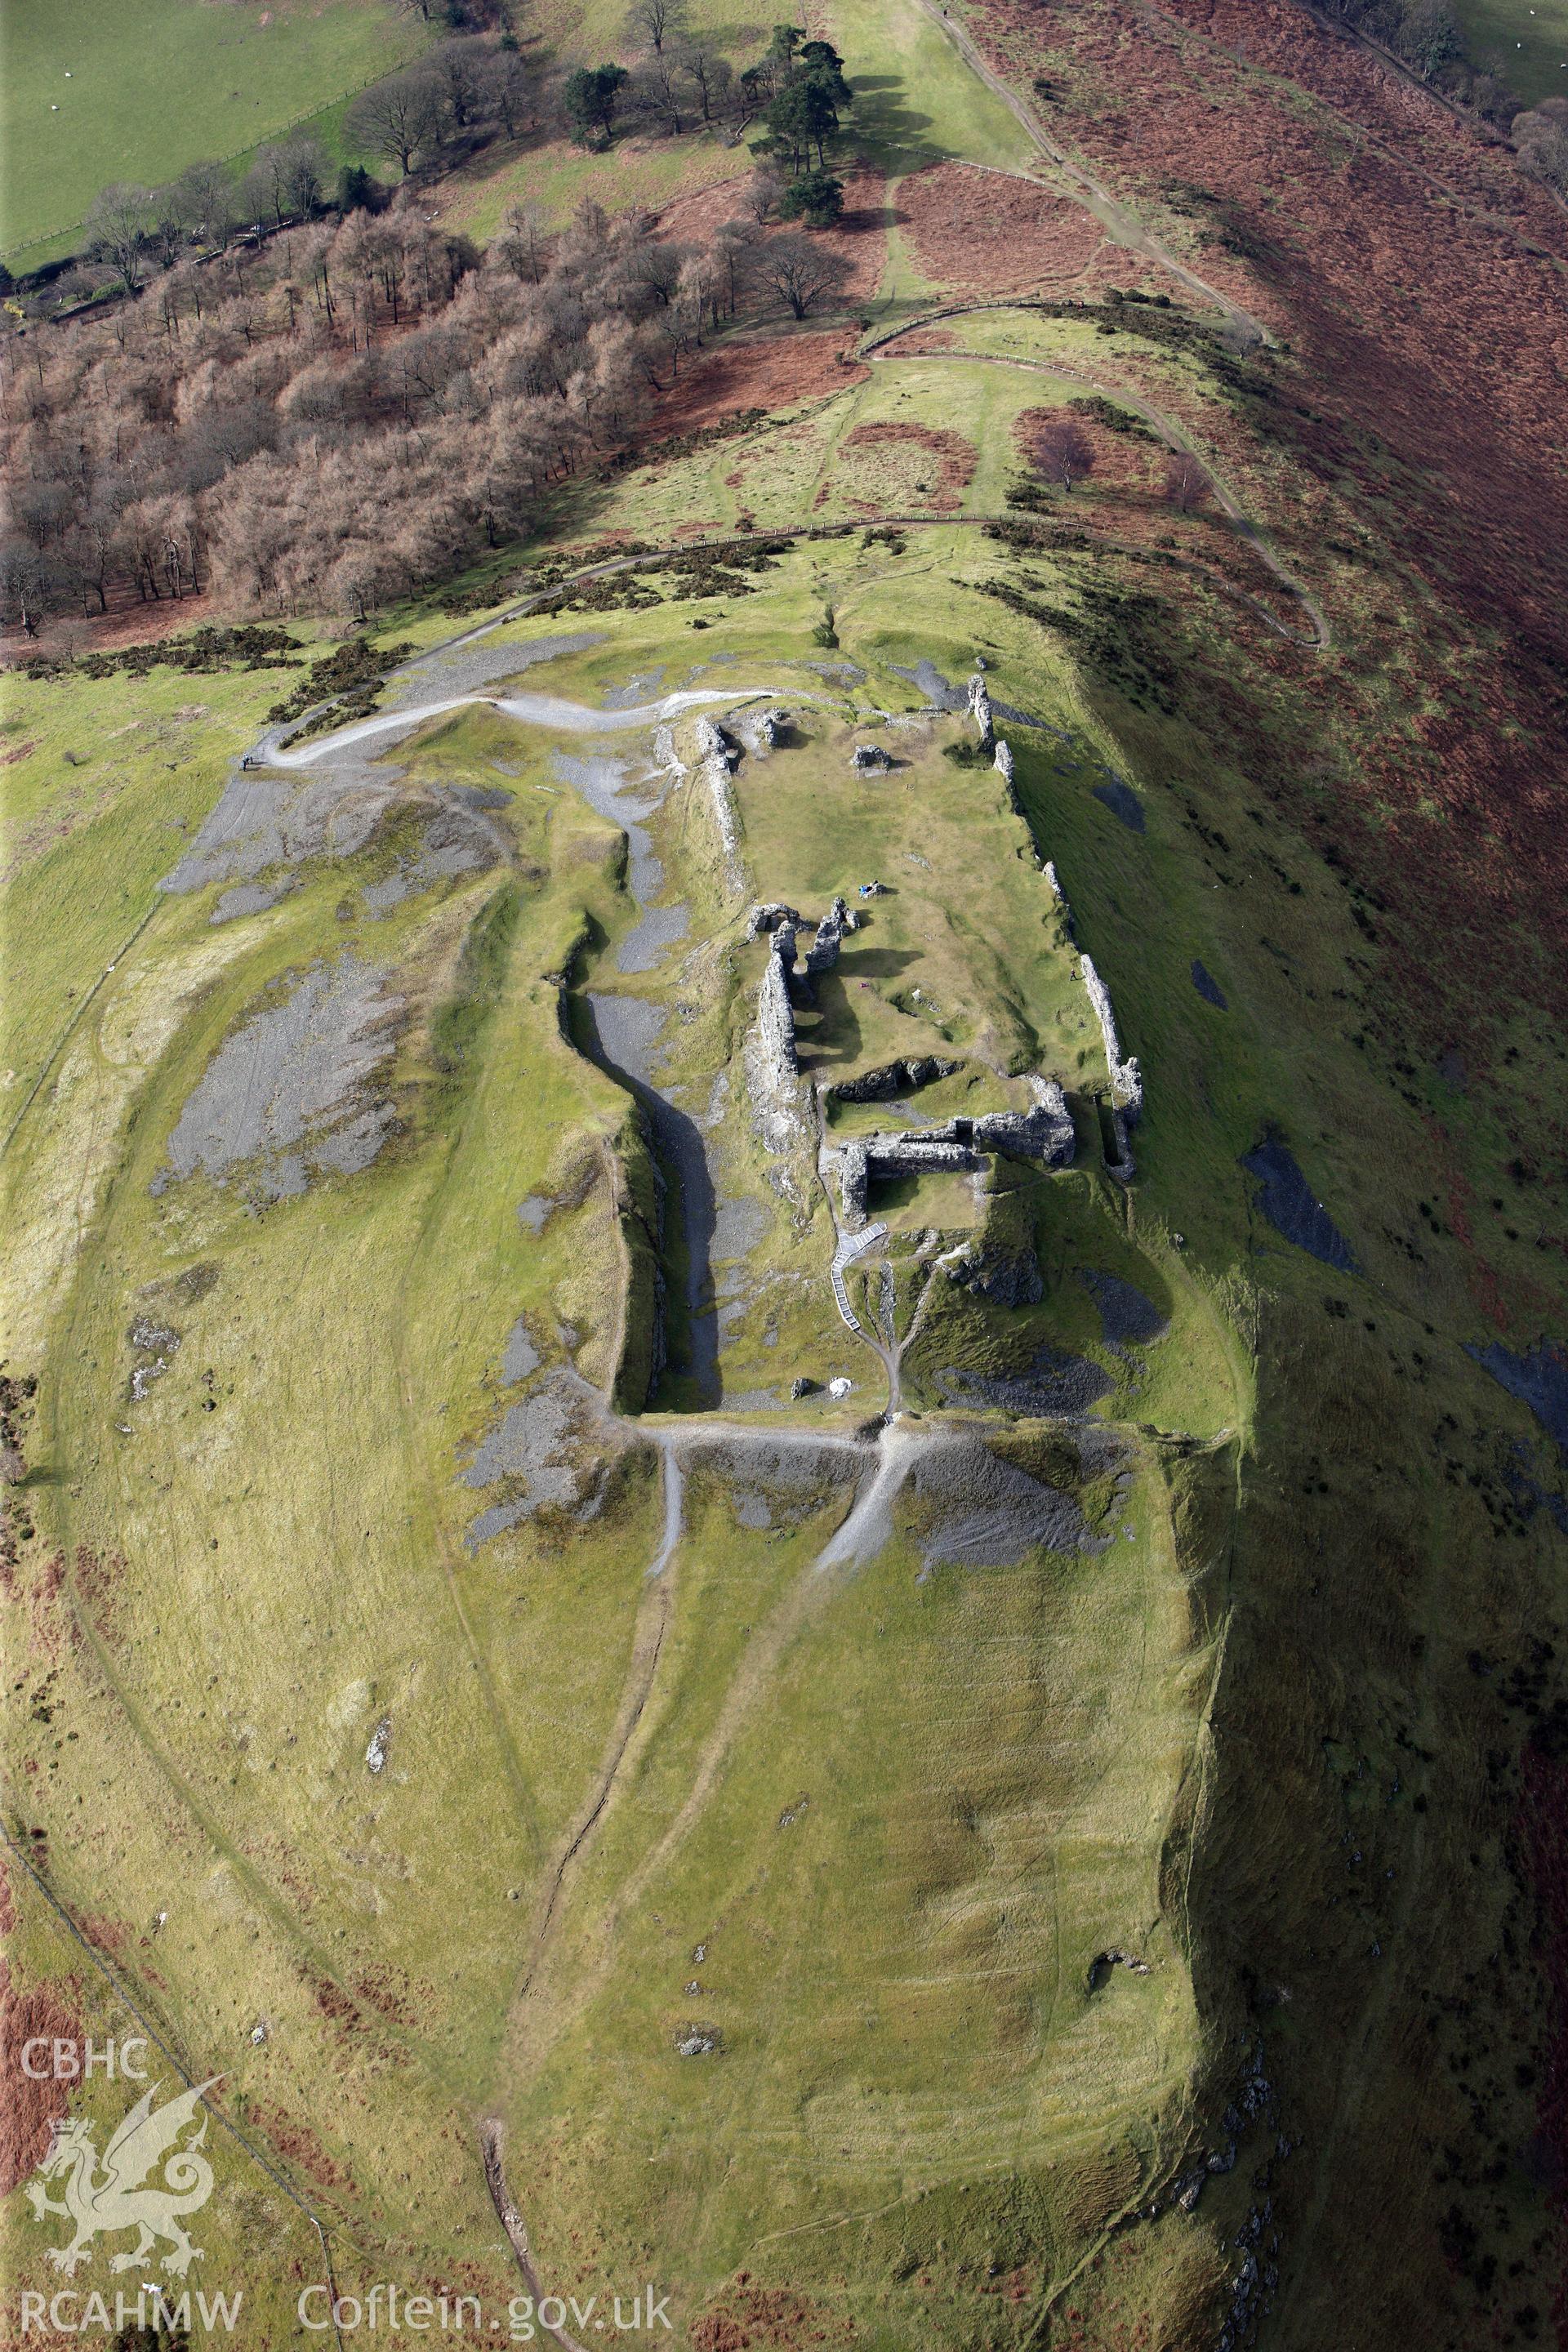 Castell Dinas Bran ruined castle and earthwork enclosure, east of Llangollen. Oblique aerial photograph taken during the Royal Commission?s programme of archaeological aerial reconnaissance by Toby Driver on 28th February 2013.